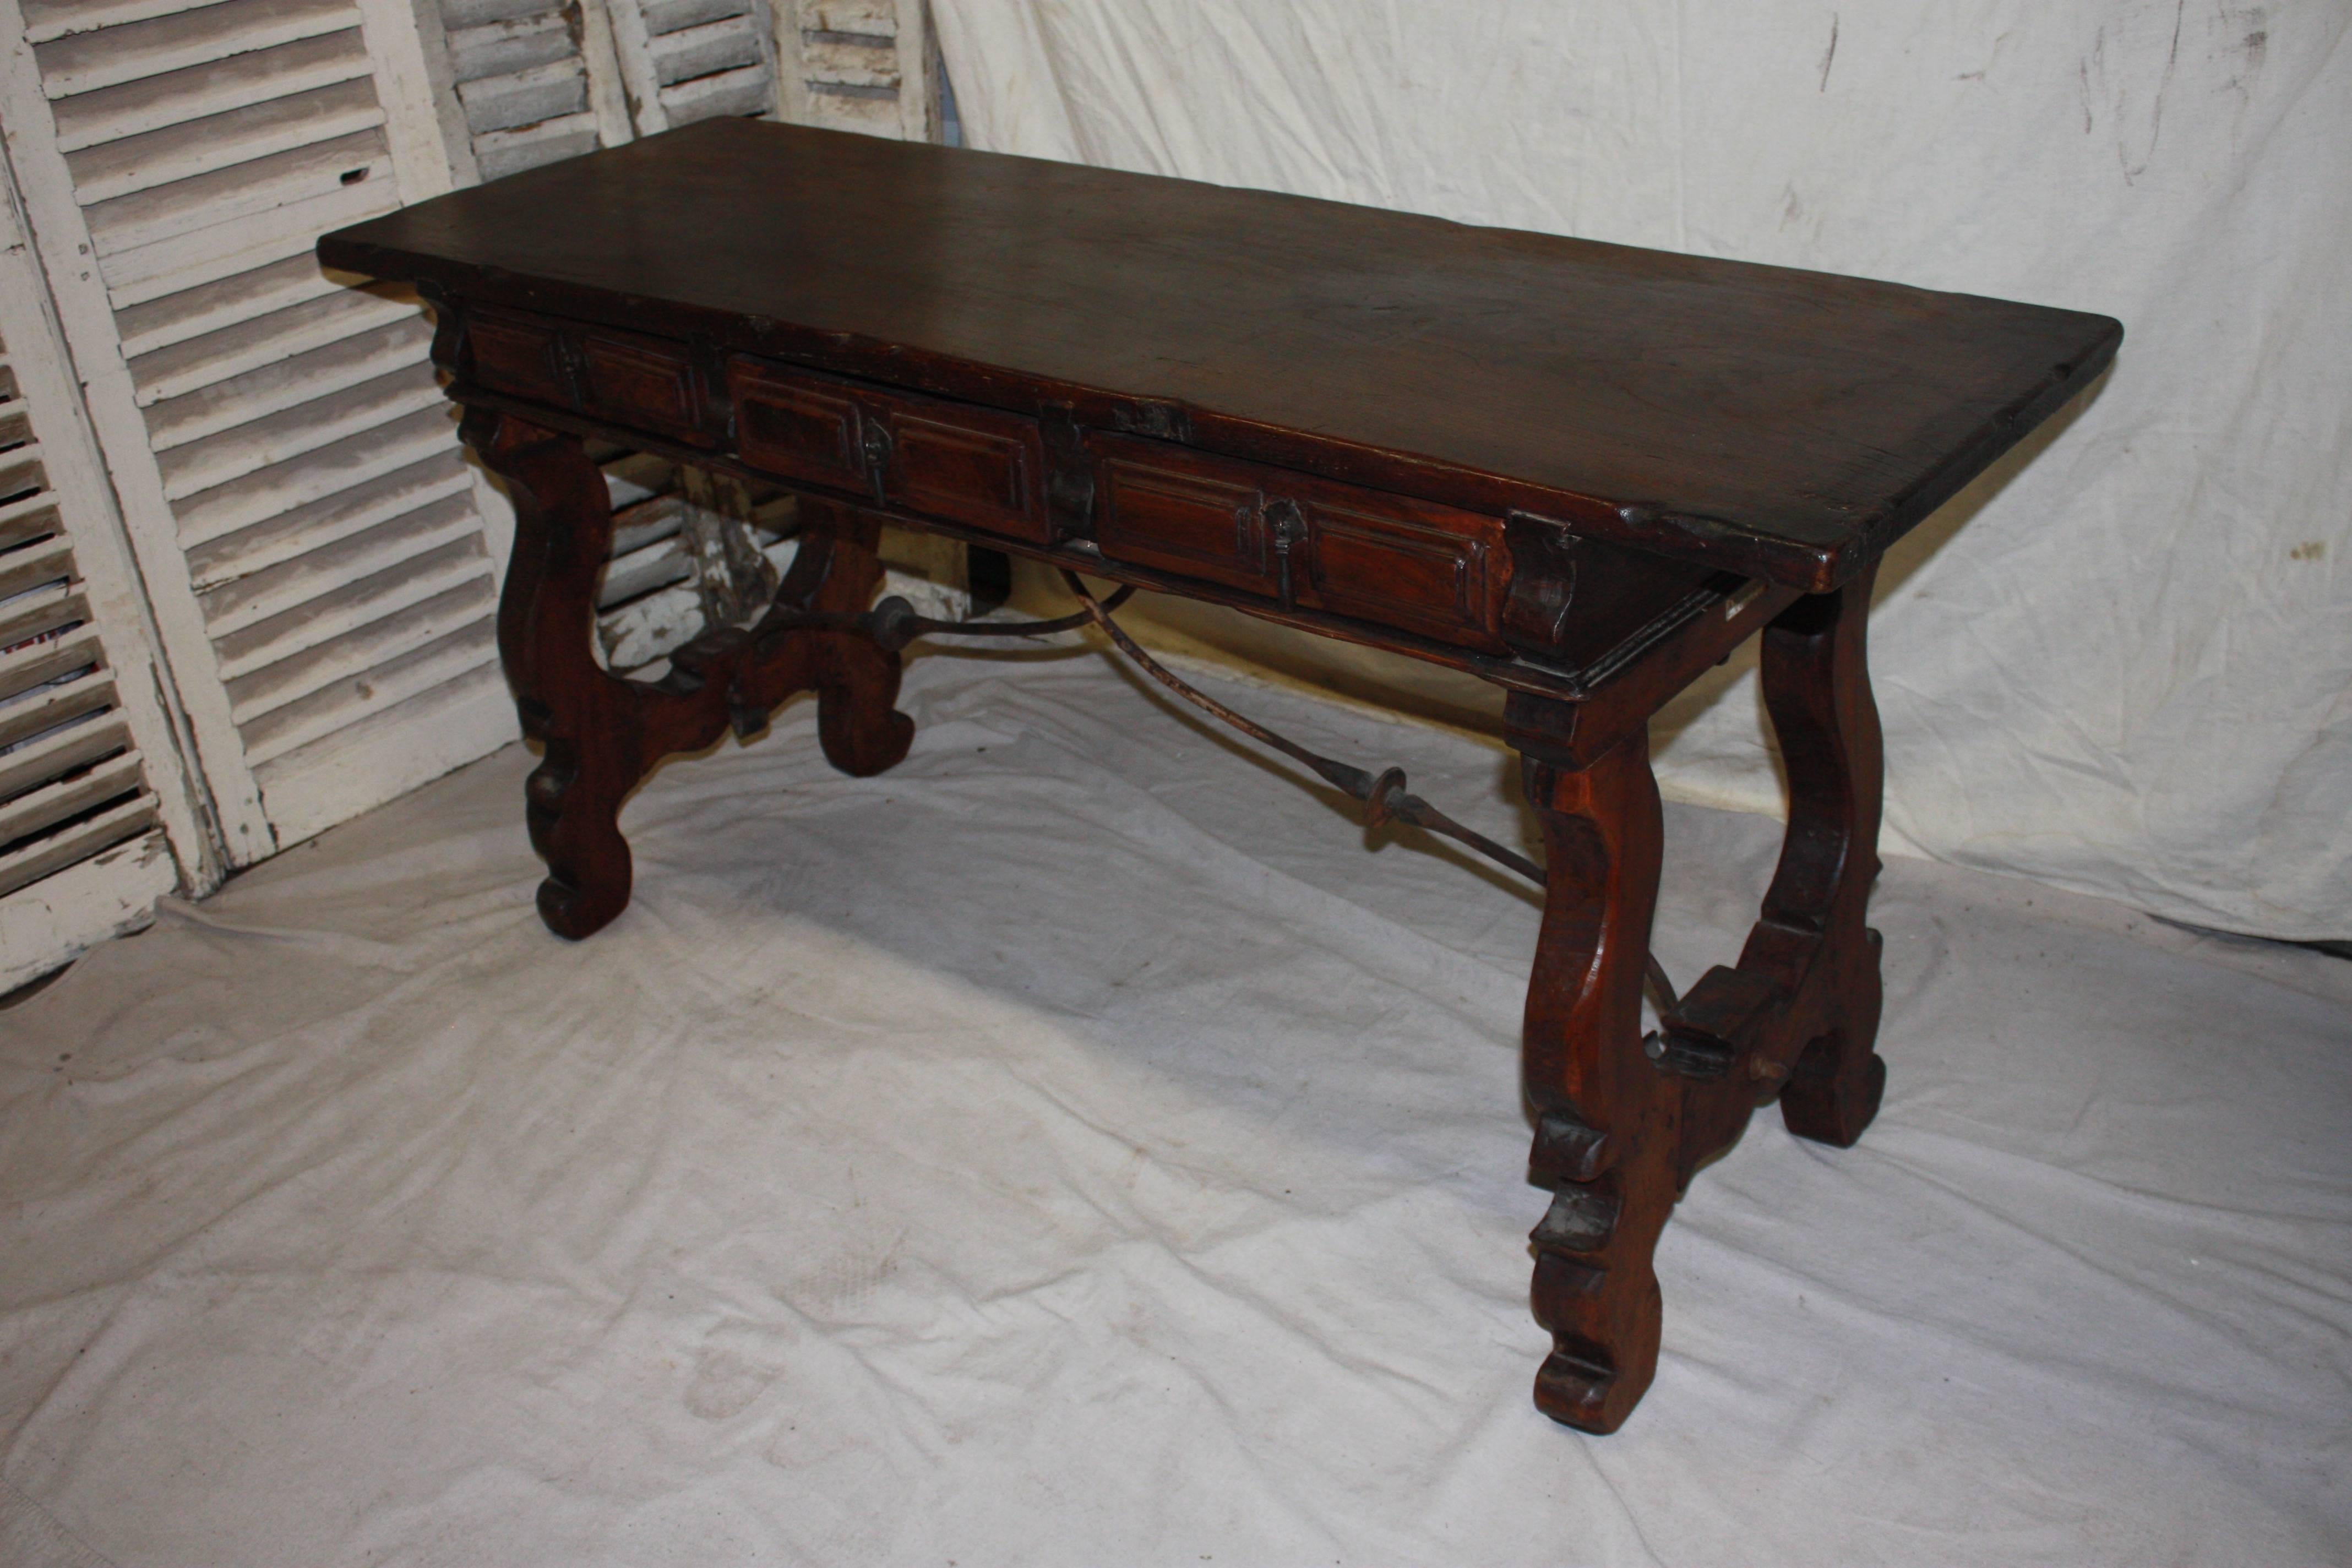 19th century French console table in walnut from the south of France. Carved legs and iron stretcher, 3 drawers in the front, beautiful warm patine.